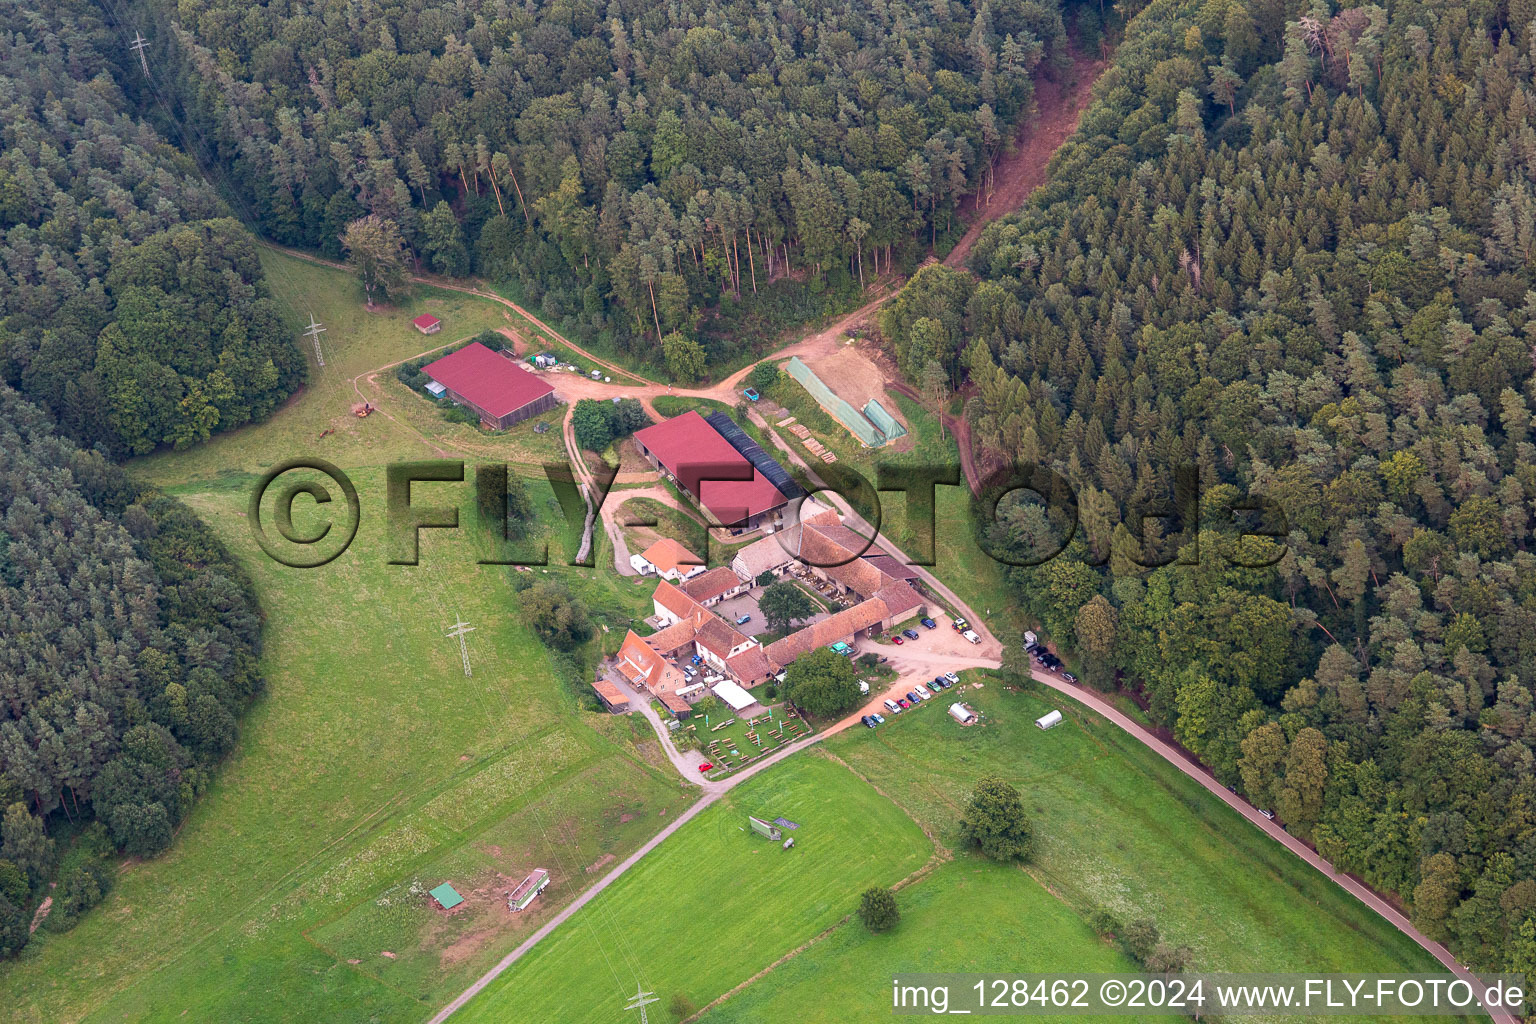 Aerial photograpy of Bärenbrunnerhof in Busenberg in the state Rhineland-Palatinate, Germany